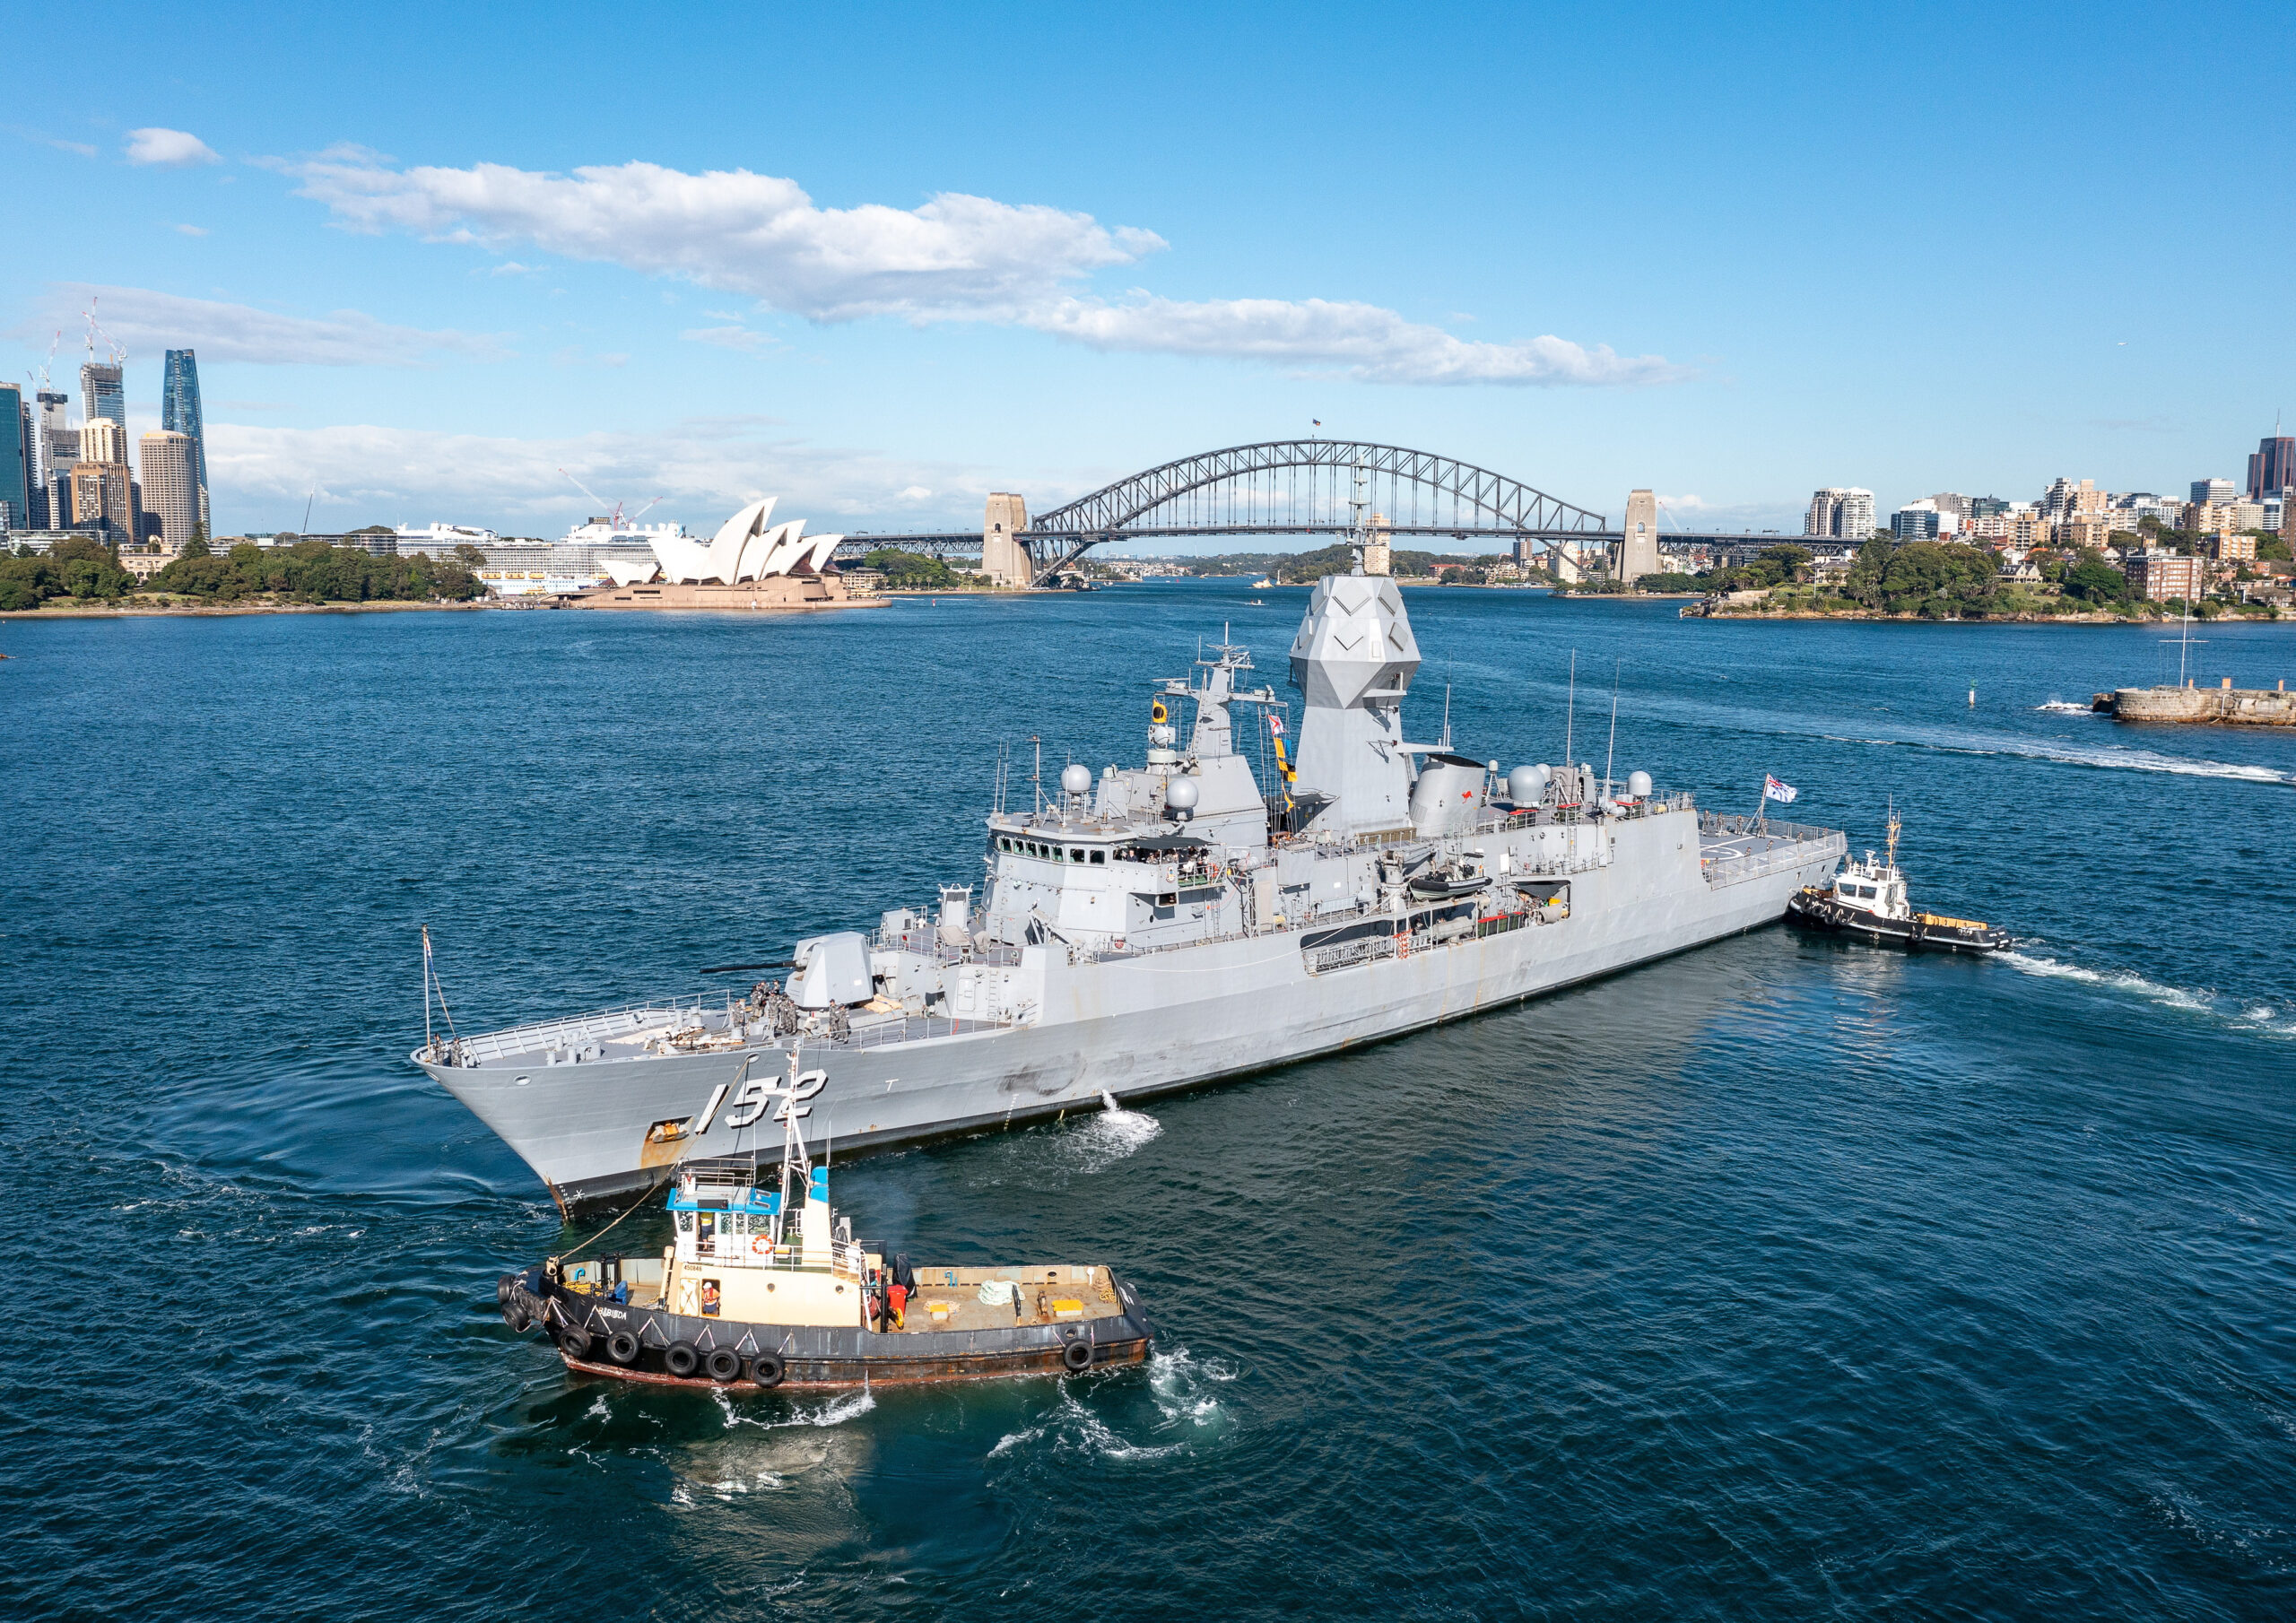 HMAS Warramunga sails into Sydney Harbour to berth at her new home port of Fleet Base East in Sydney. *** Local Caption *** HMAS Warramunga arrived in Sydney at the ships new home port of Fleet Base East, having been previously home ported at Fleet Base West, Garden Island, Rockingham, West Australia. The ships company in Warramunga recently completed a hull swap from HMAS Parramatta to enable Parramatta to undergo a capability upgrade in West Australia. When complete, Parramatta will be equipped with one of the most advanced, sovereign air search radar capabilities in the world.